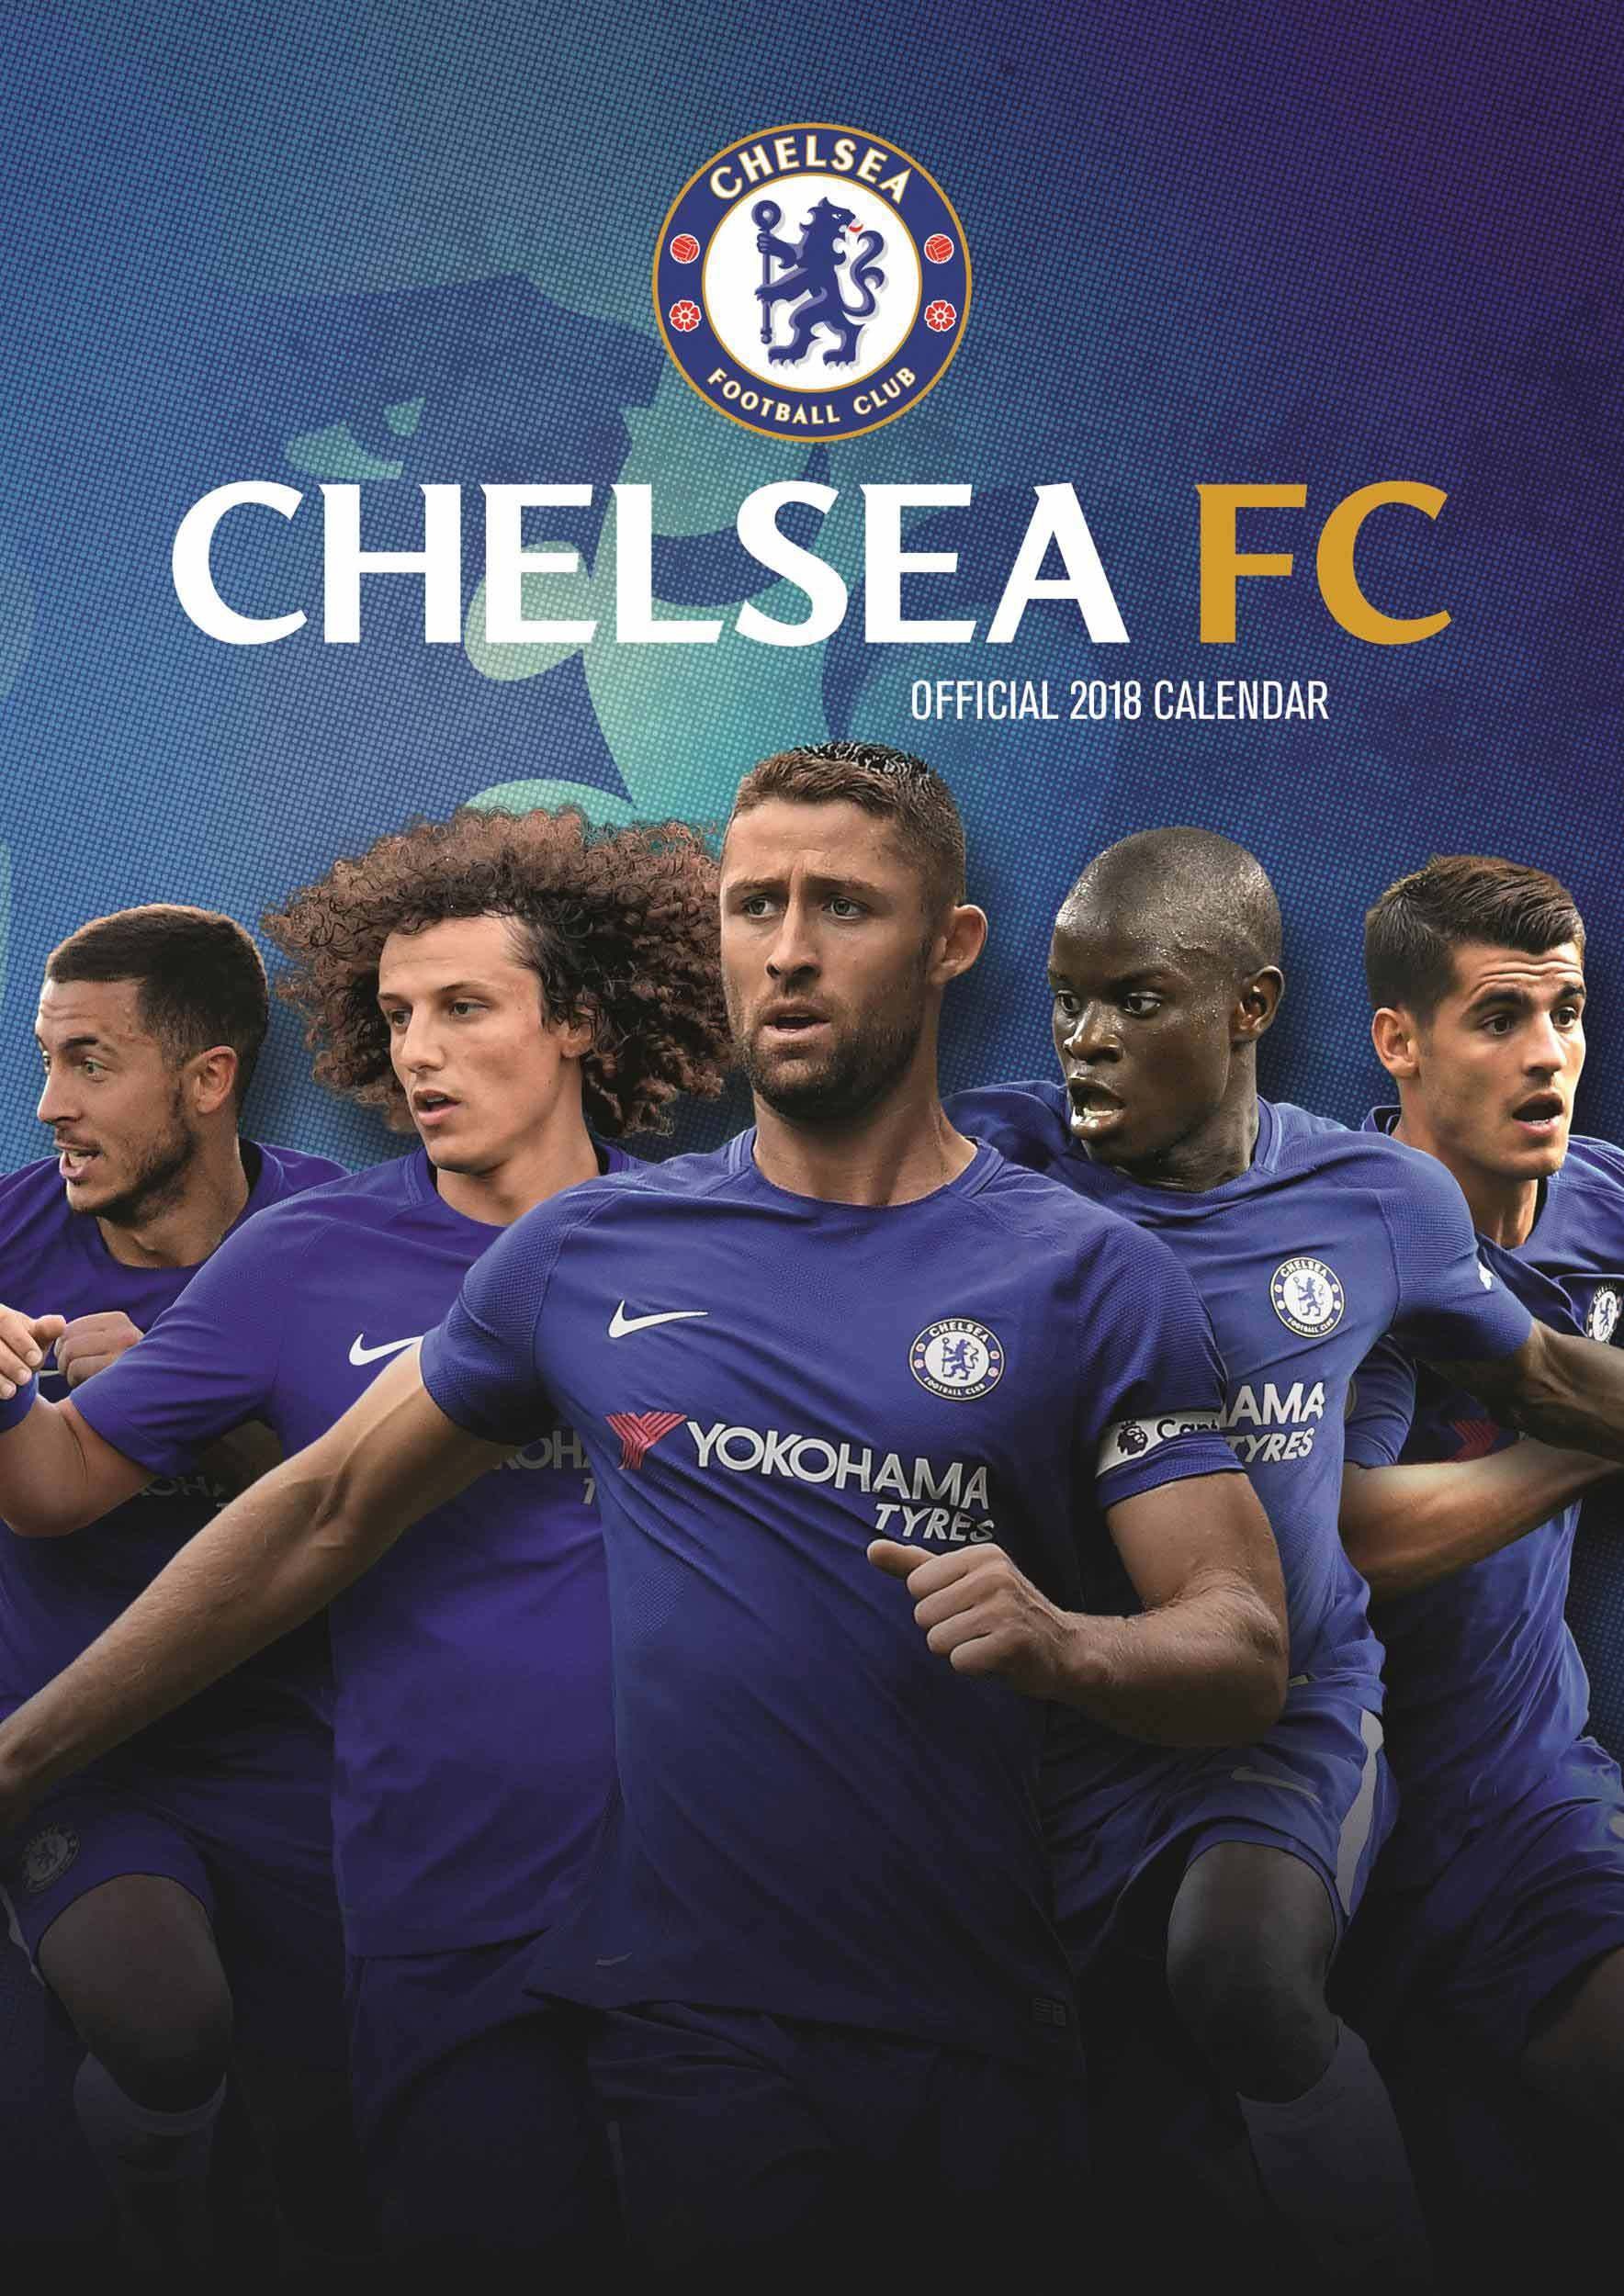 Res - 1920x1080, - Chelsea Fc Team 2018 , HD Wallpaper & Backgrounds